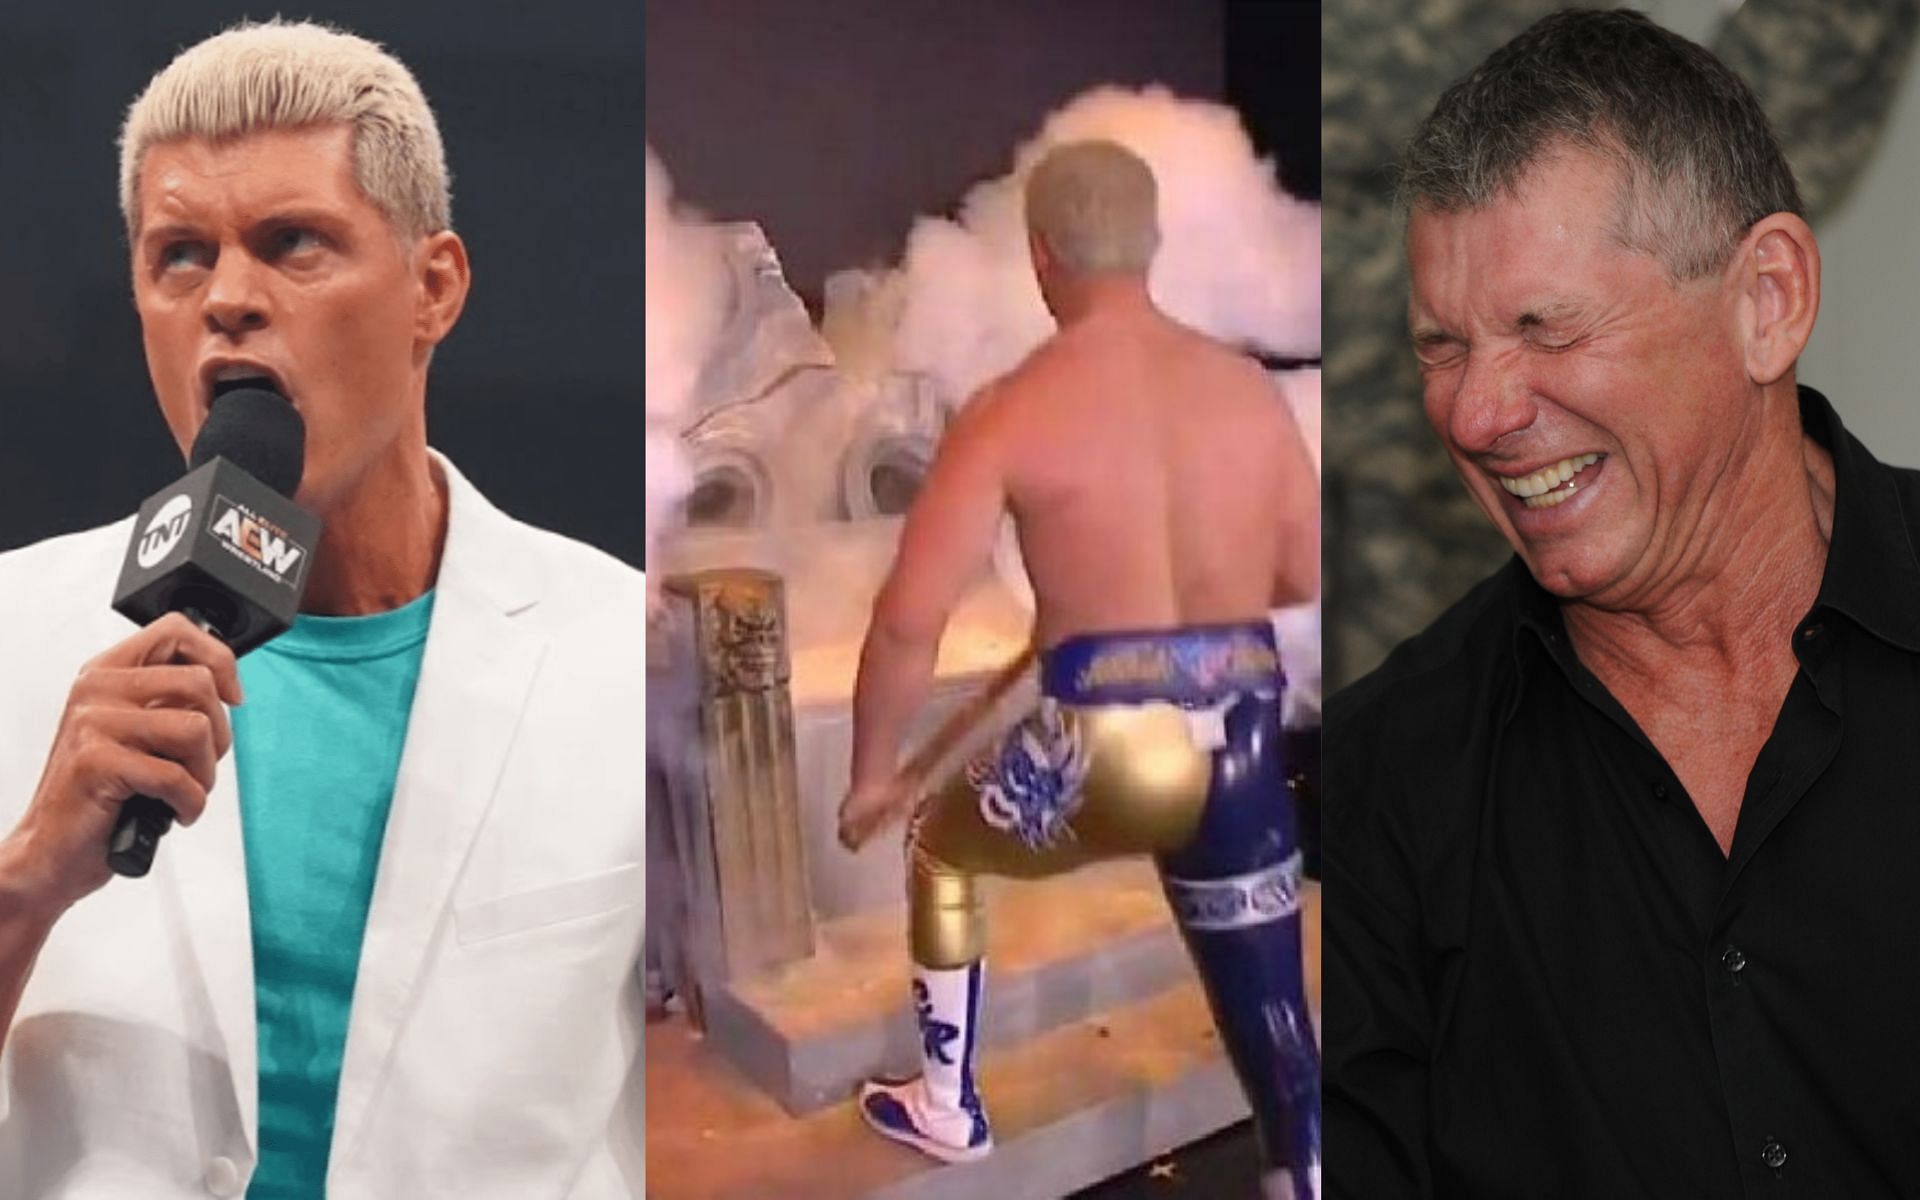 Cody Rhodes could be leaving AEW to sign with WWE in the coming weeks